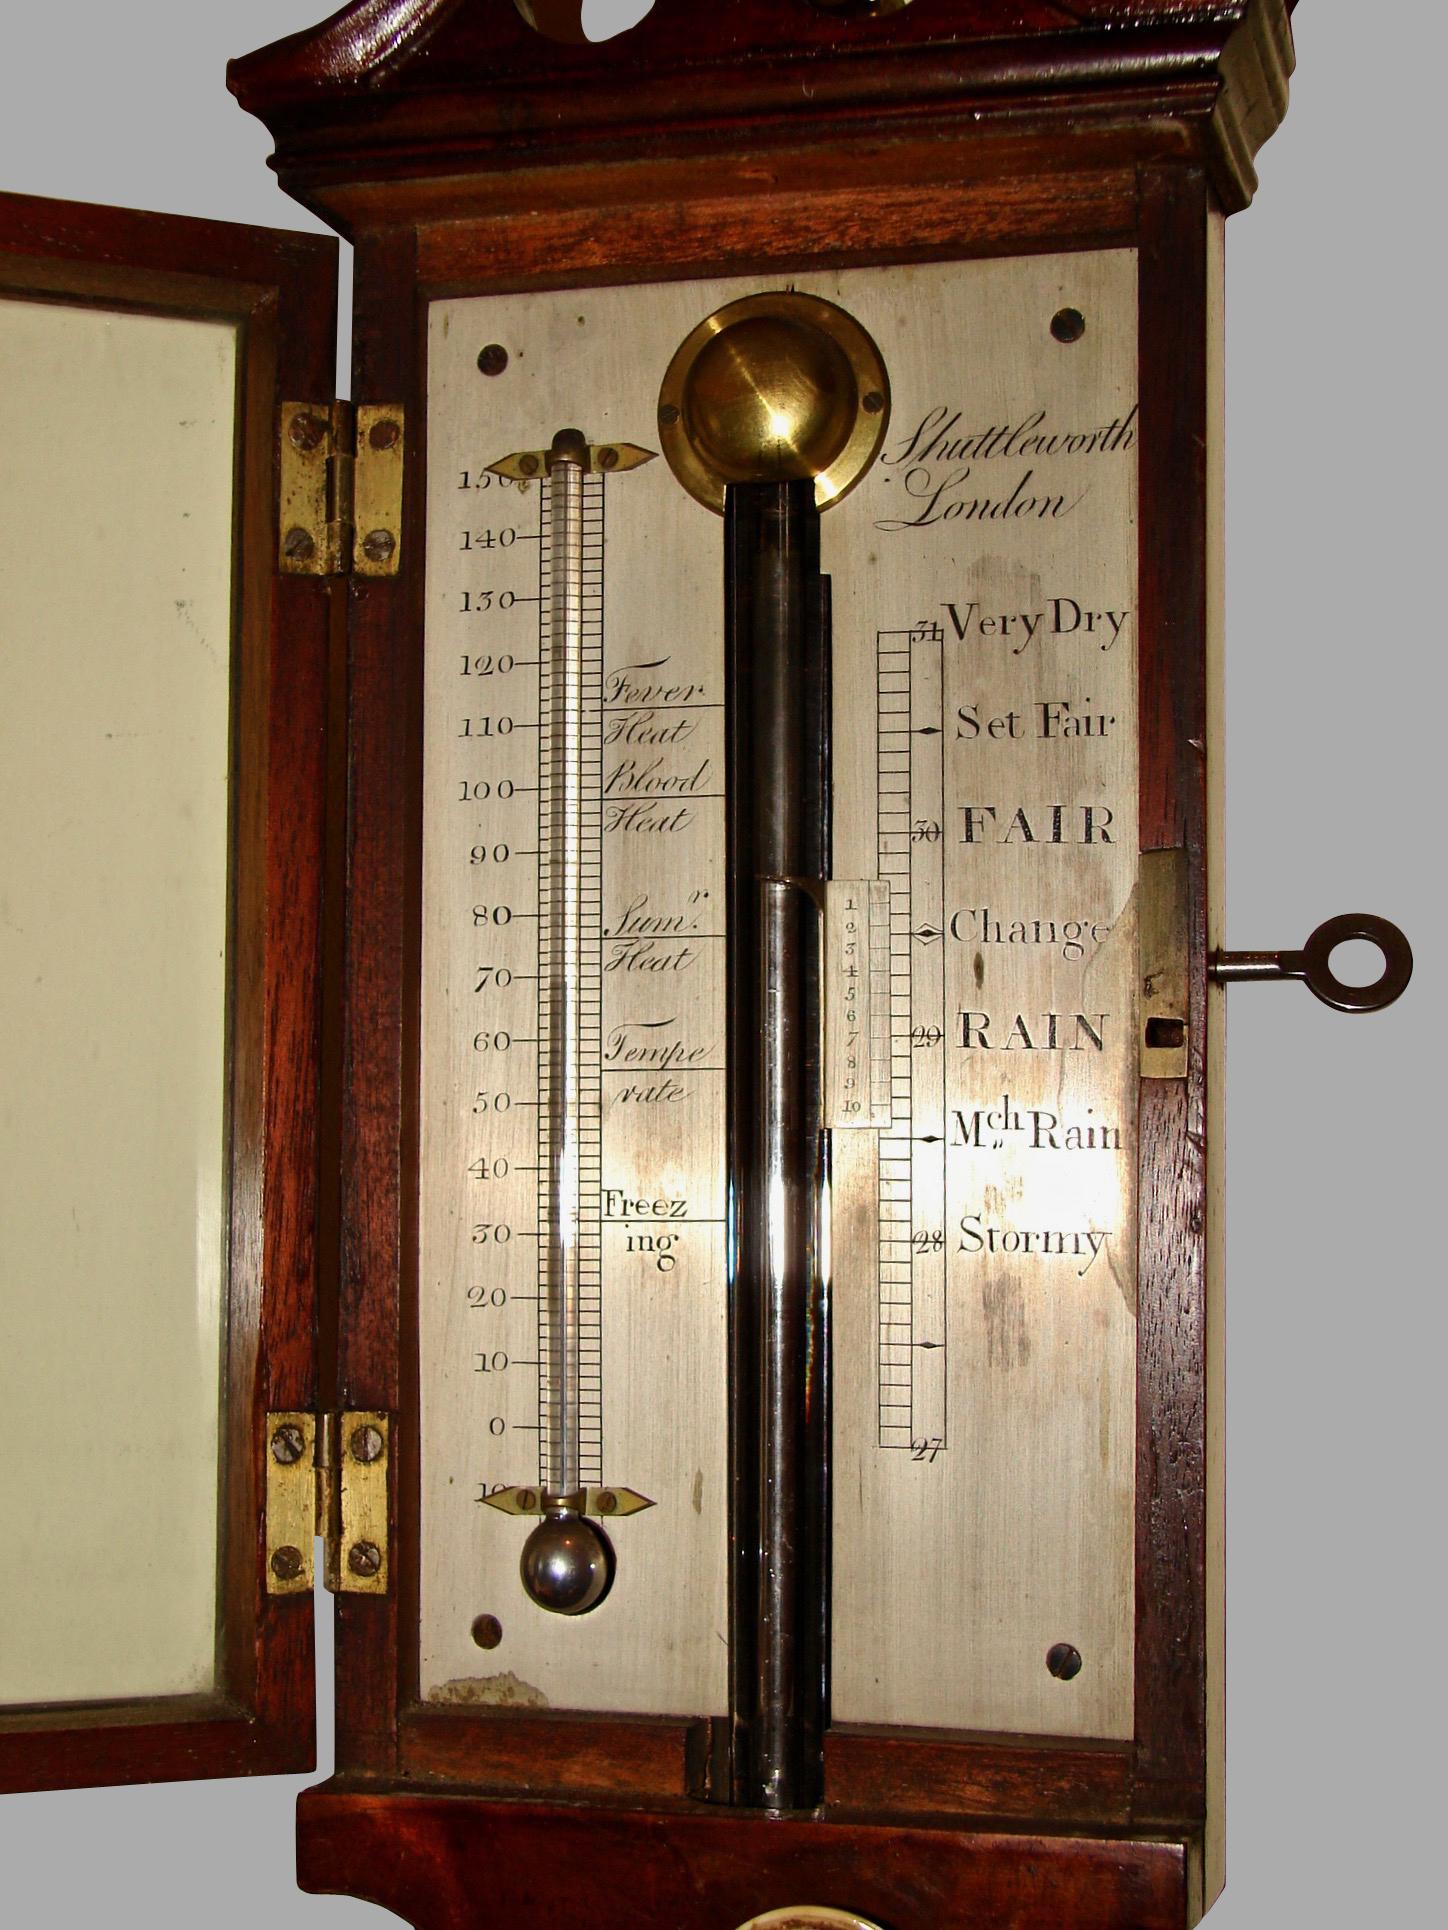 A fine George III mahogany stick barometer and thermometer with an engraved silvered register, made and signed by Henry Raines Shuttleworth, London. Shuttleworth flourished from 1746-1811 and was a well-regarded optician and instrument maker.